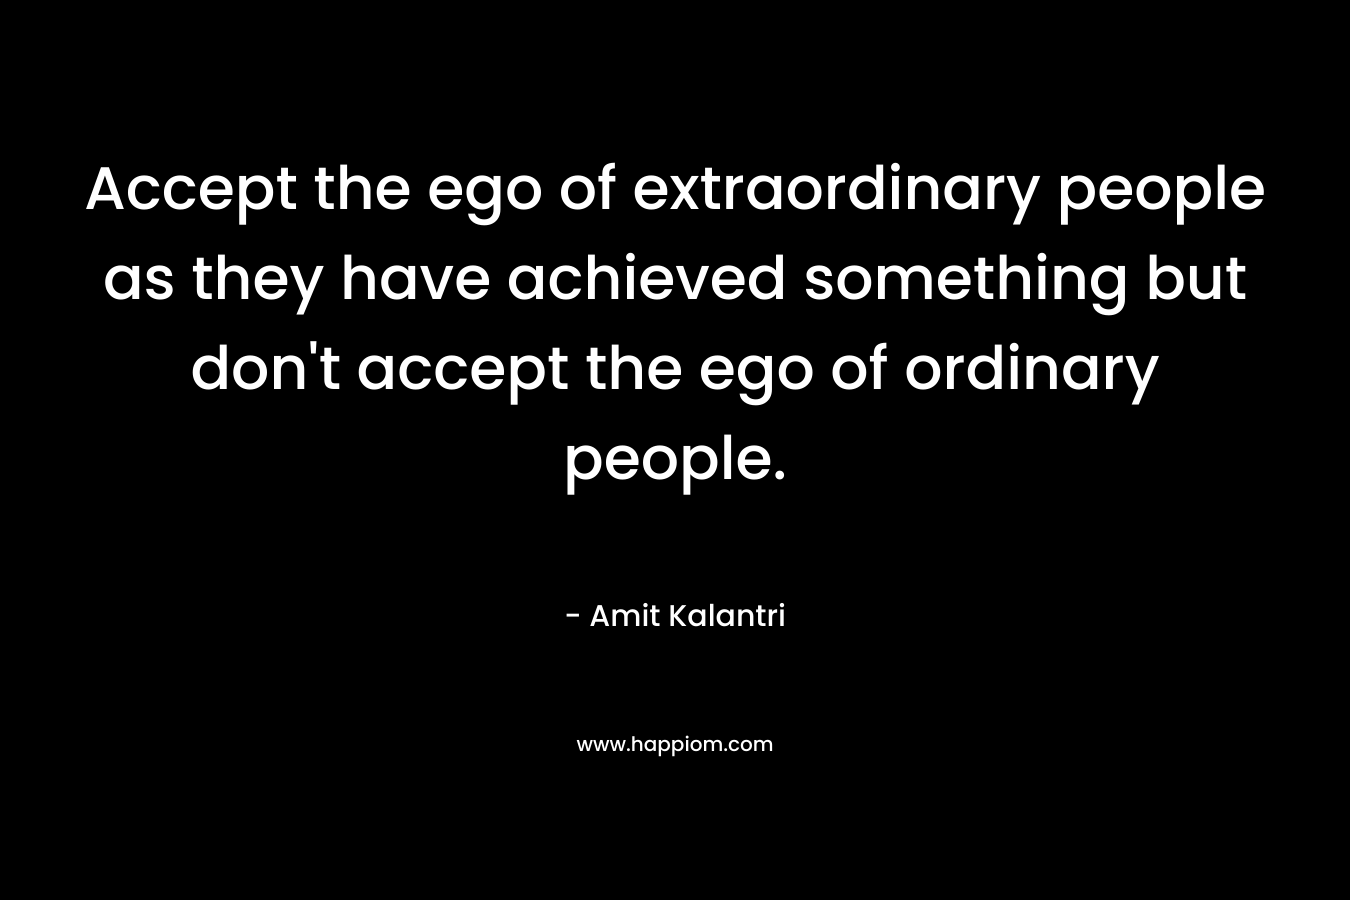 Accept the ego of extraordinary people as they have achieved something but don't accept the ego of ordinary people.